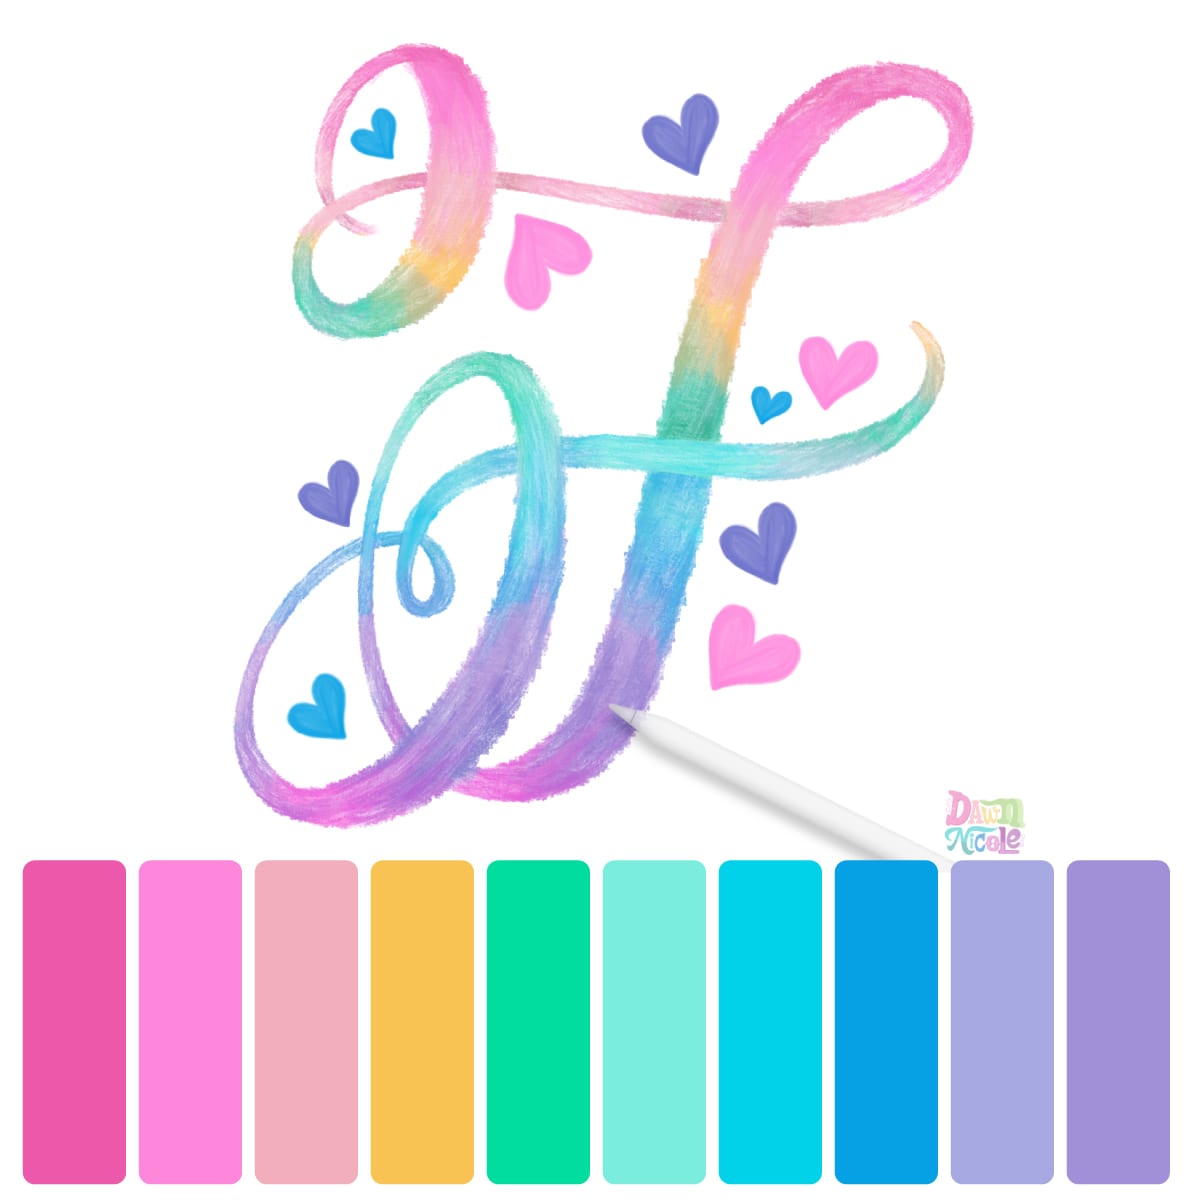 Procreate Tutorial: Rainbow Calligraphy Crayon. Creating this colorful style of lettering is oh-so-easy. Follow these steps to whip up your own version. Plus, a free color palette!